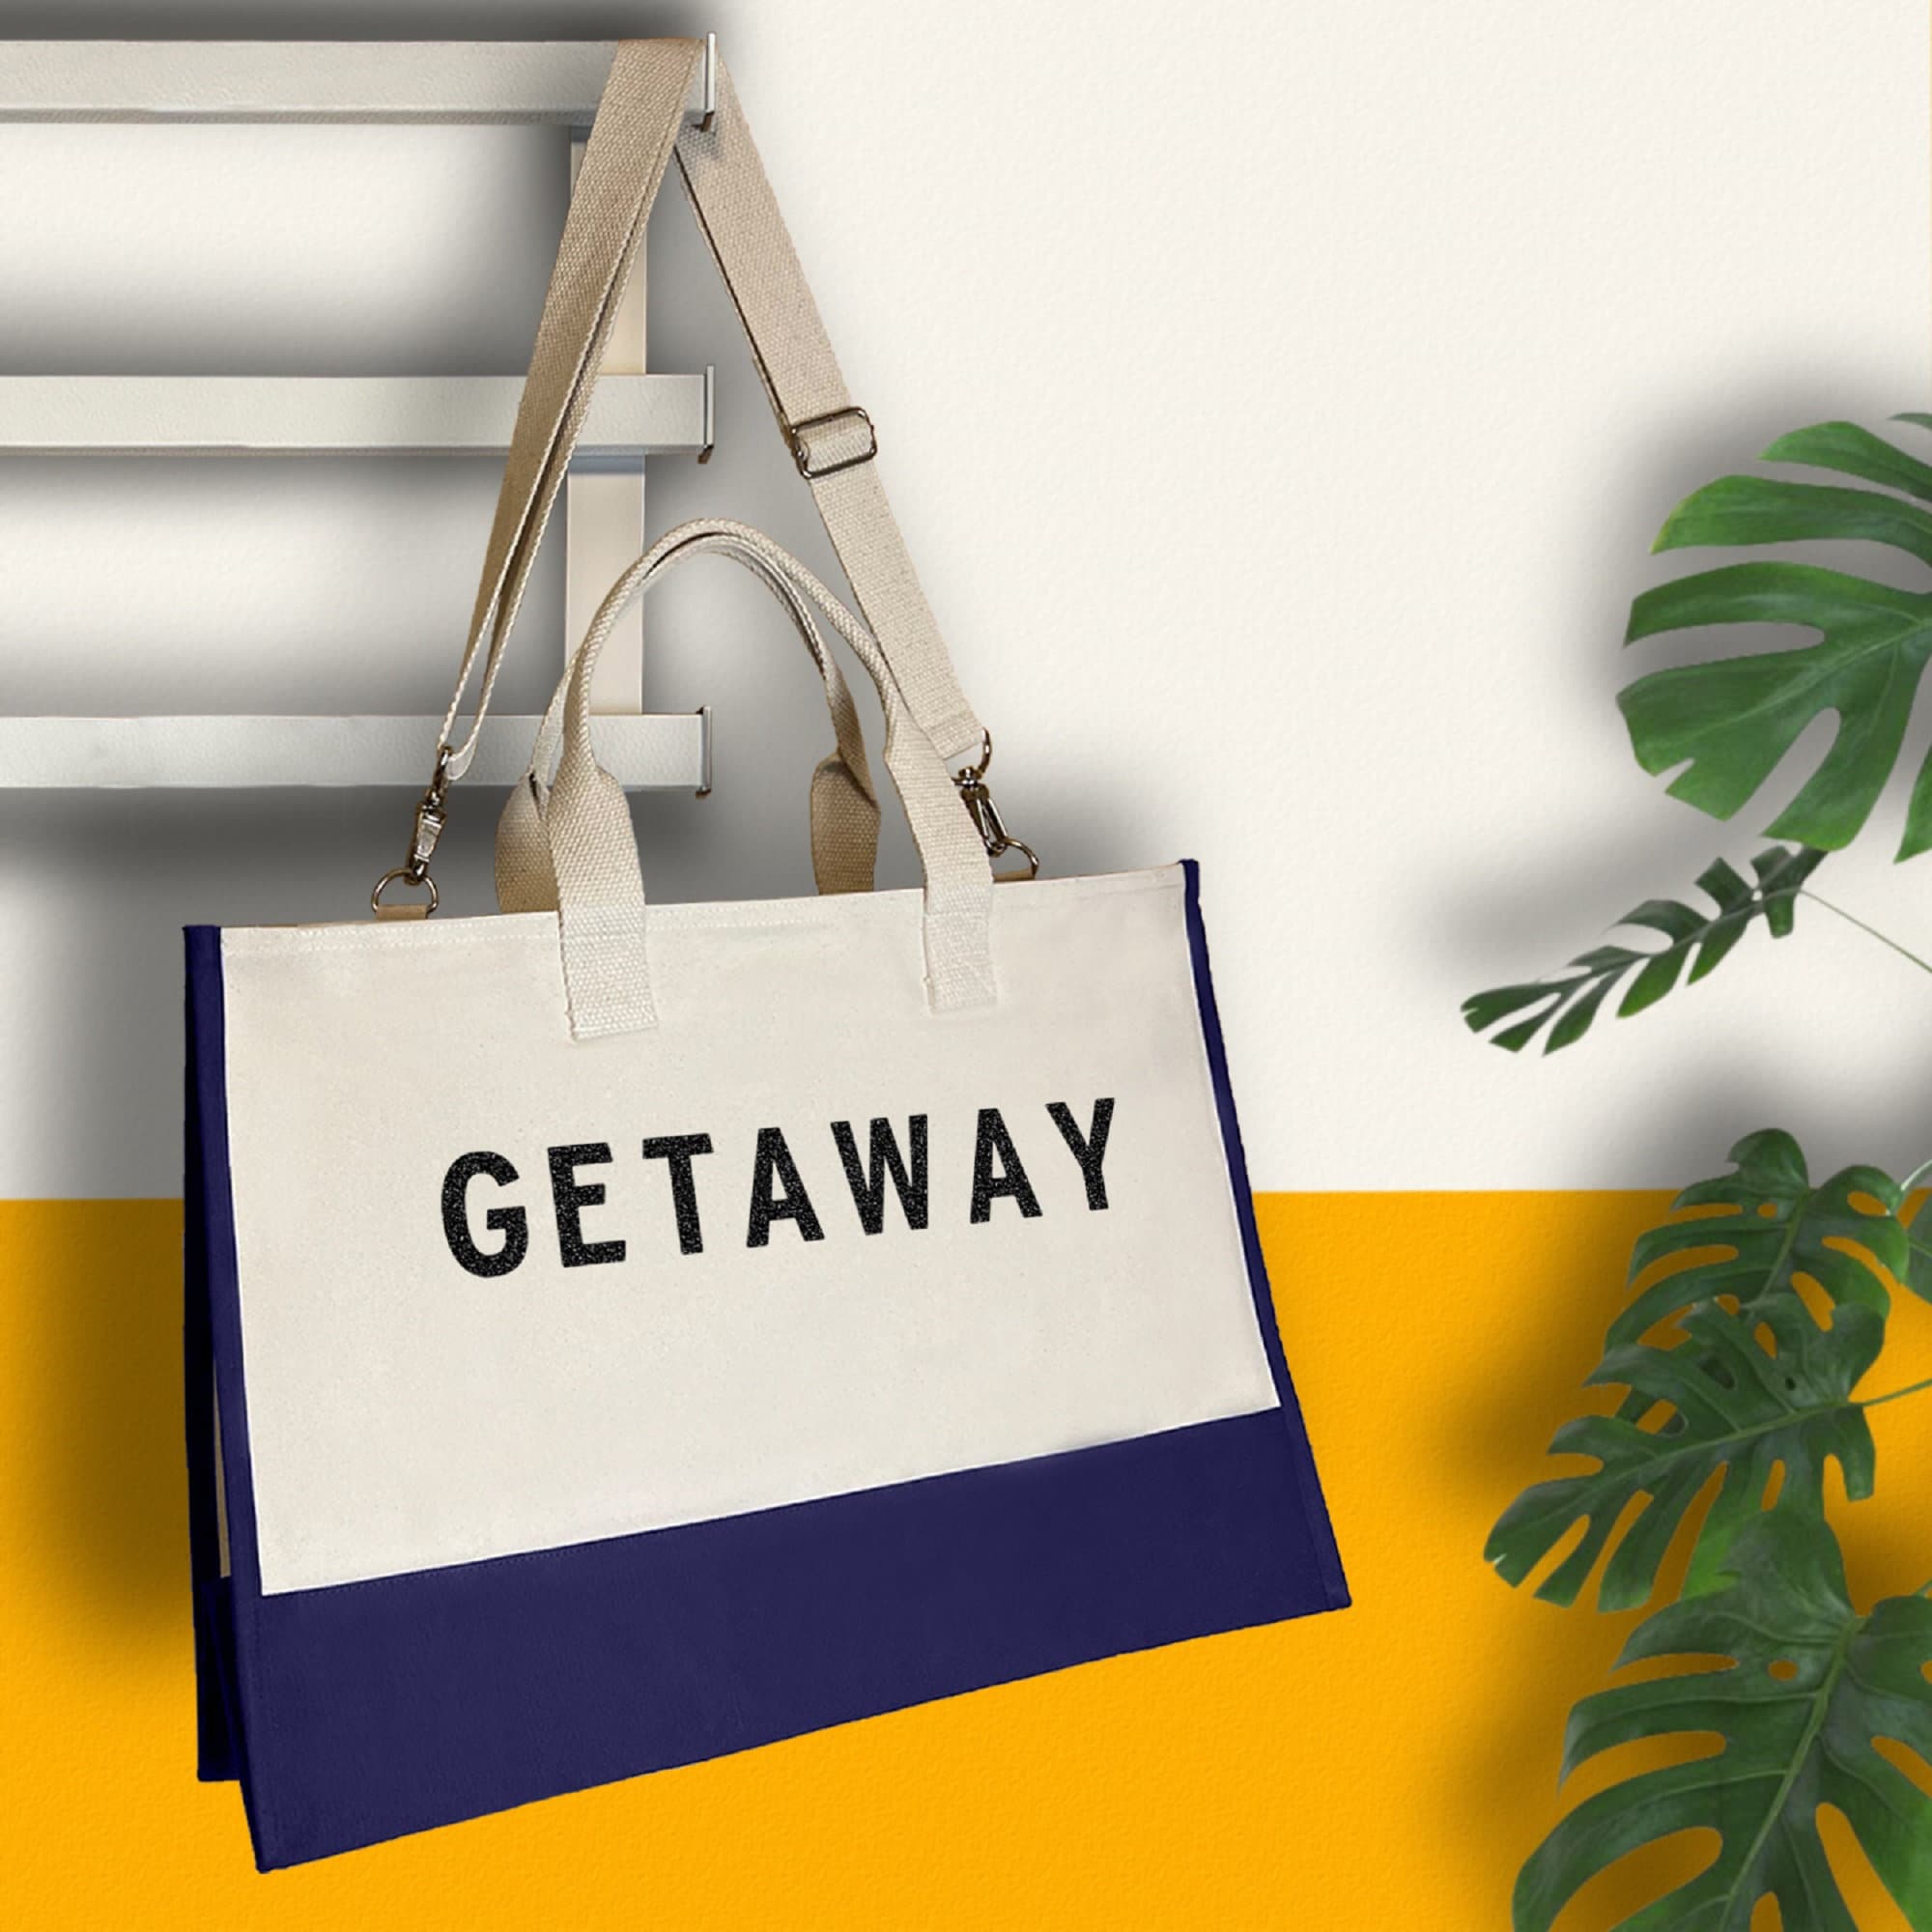 Getaway Beach Tote Bag XL - Oversized Chic Tote Bag with Zipper and Inner Pocket-Gift for Her -Vacation Tote Bag -Weekender Bag -Travel Tote